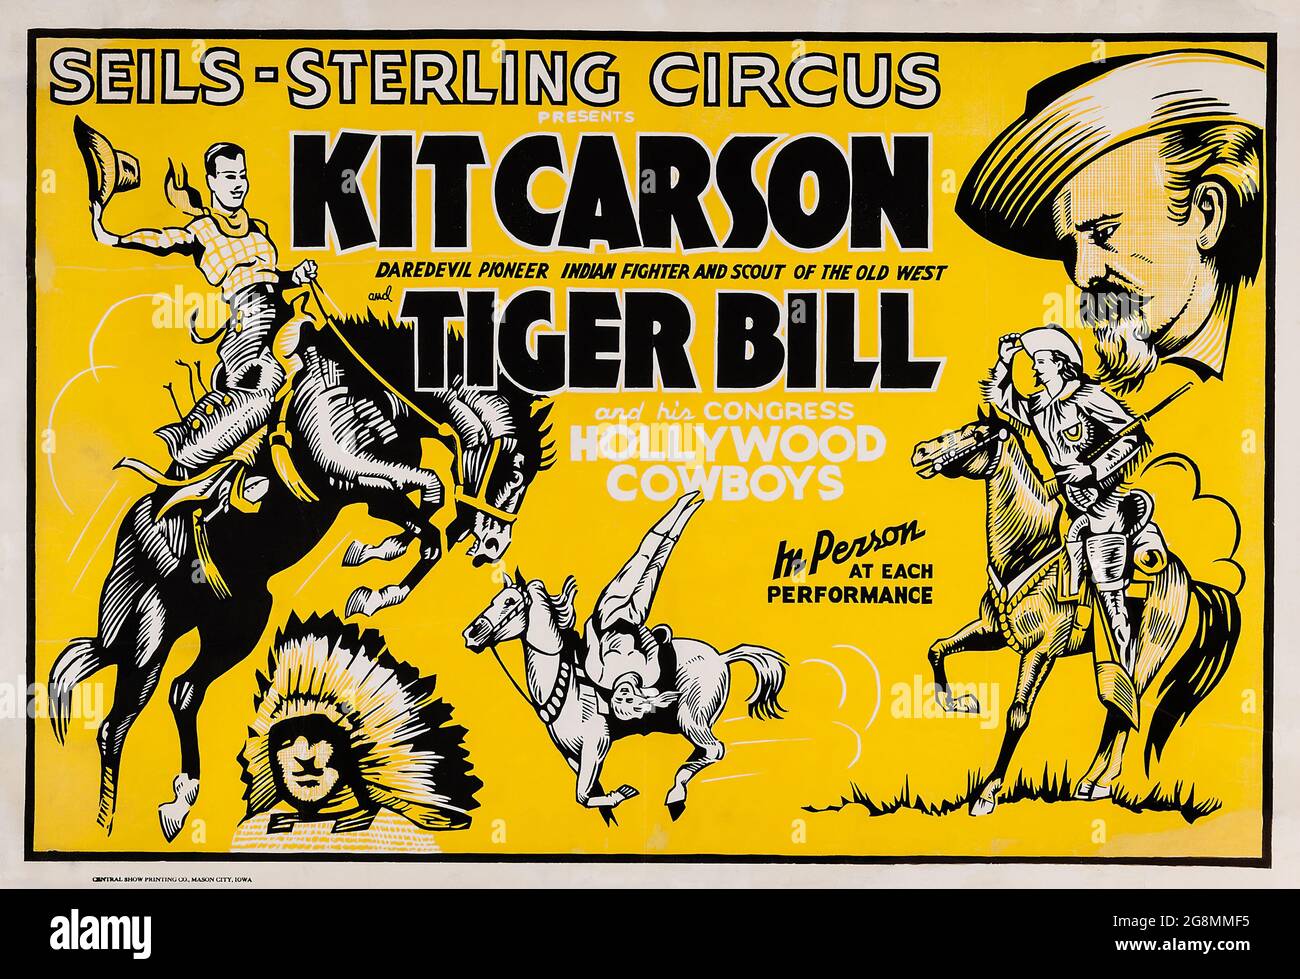 Kit Carson in the Seils-Sterling Circus (Central Show Printing Co., 1930s) Vintage Circus poster also featuring Tiger Bill. Stock Photo